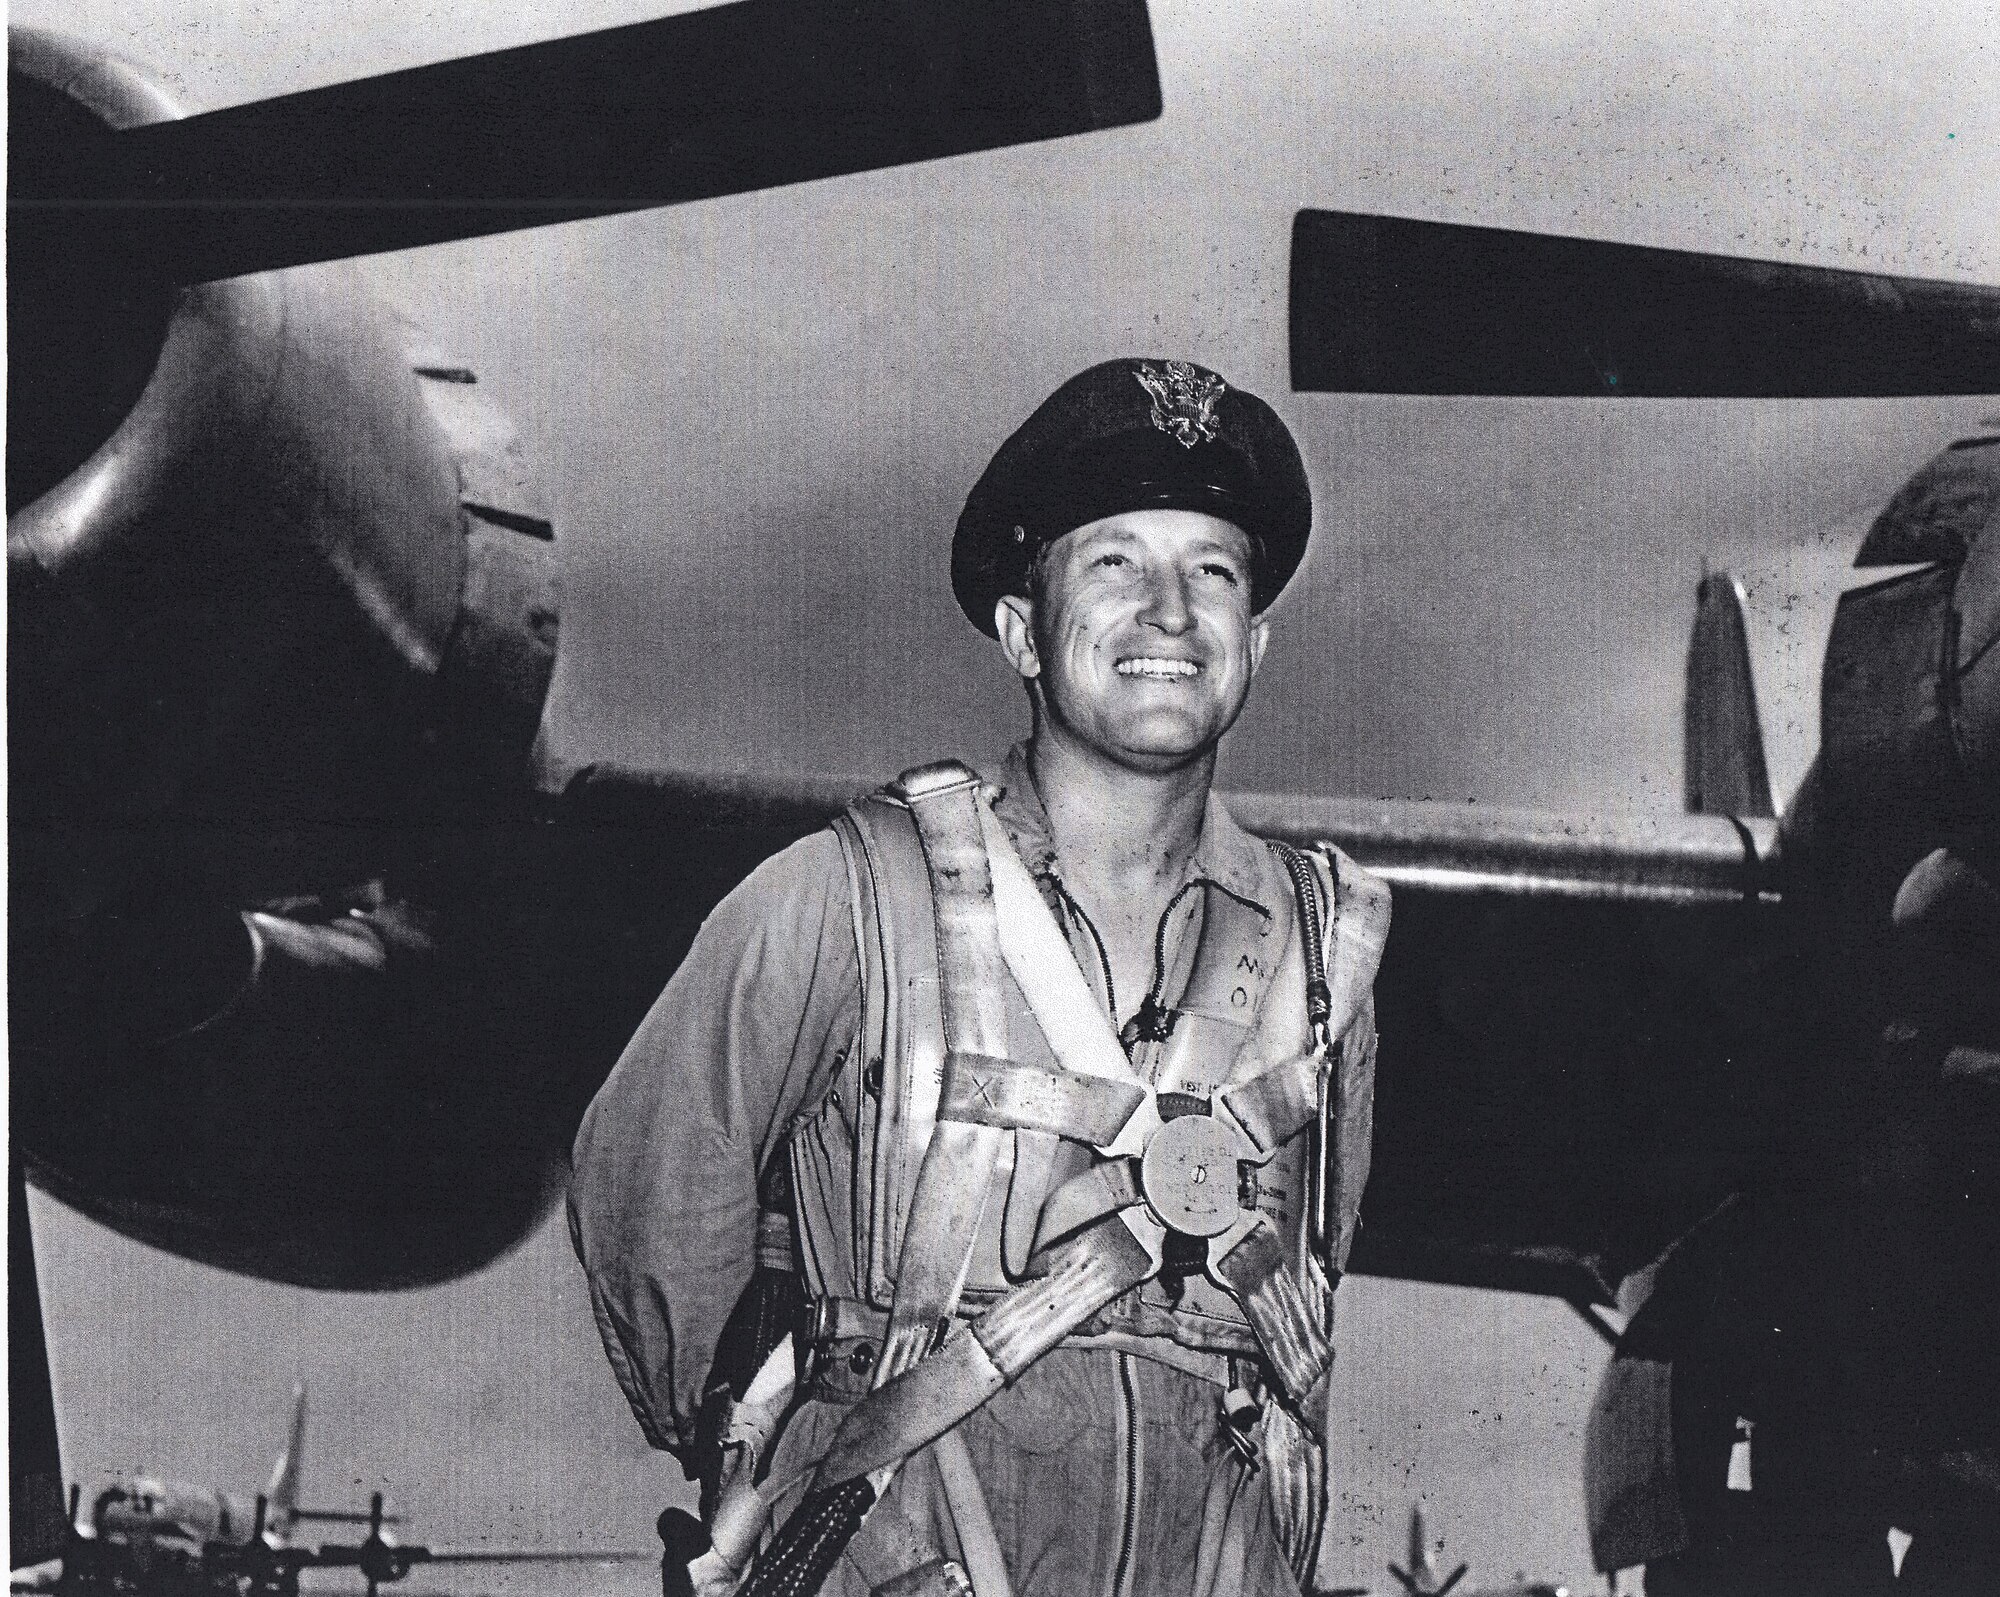 Ret. Lt. Col. Bruce Sooy poses in front of a B-50D aircraft at Eglin AFB, FL in 1951. He was performing air to air refuel testing with KC-97s. (Courtesy photo)